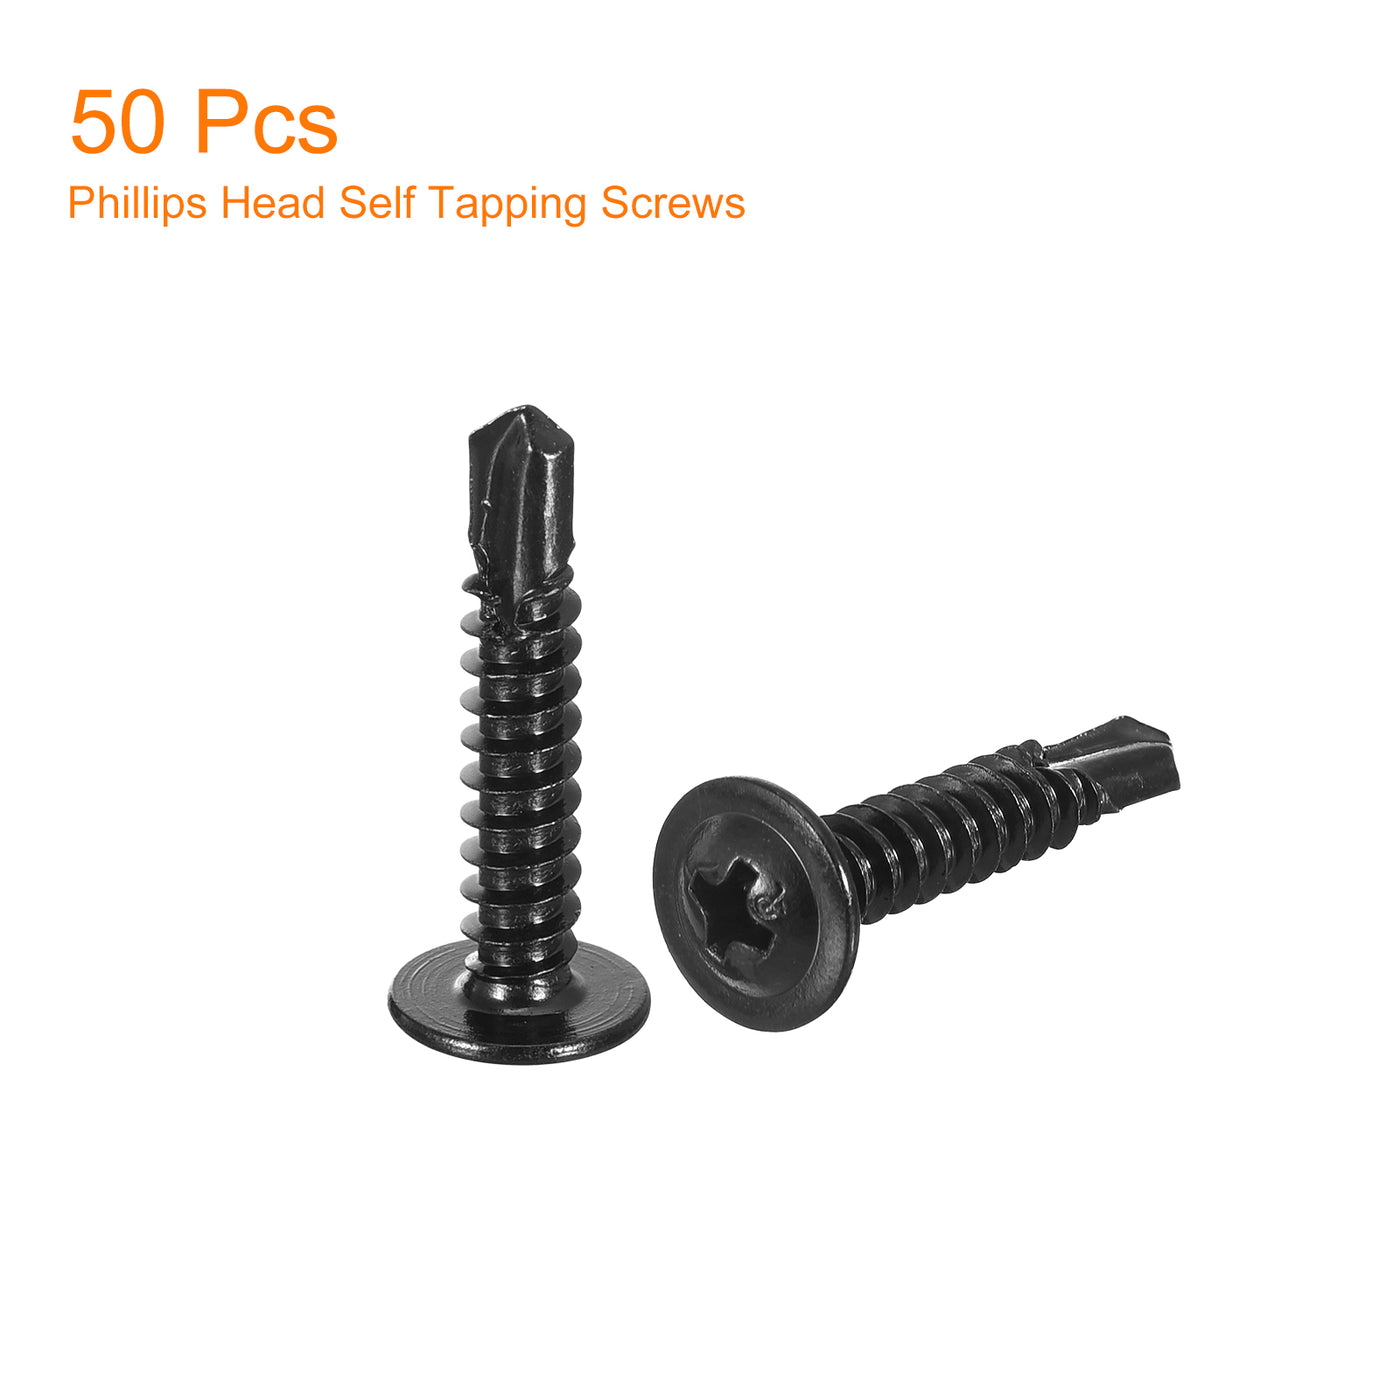 uxcell Uxcell Phillips Head Self Tapping Screws, 50pcs #10x1" Sheet Metal Screw